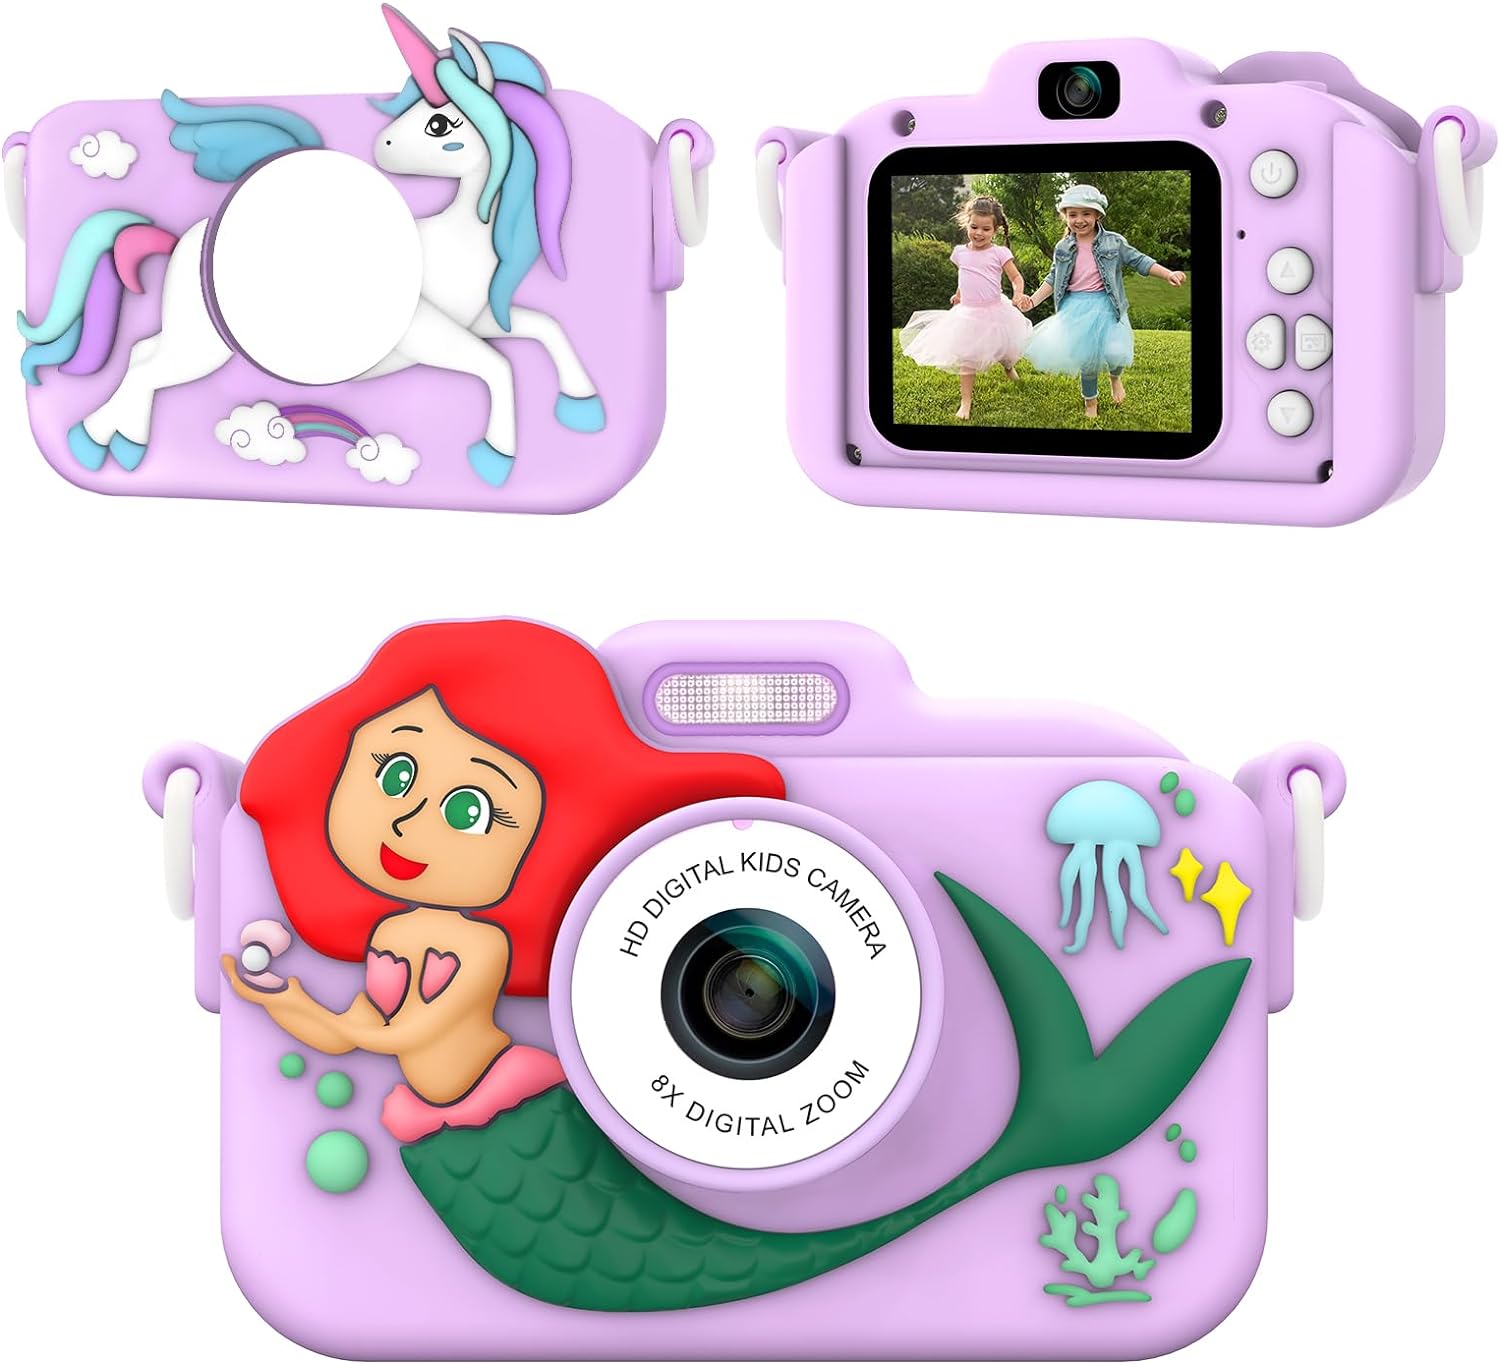 Kids Camera, Mermaid & Unicorn Selfie Digital Camera Toys for Kids, Christmas Birthday Gifts for Girls Boys Age 3 4 5 6 7 8 9 Years Old, 32GB SD Card Included